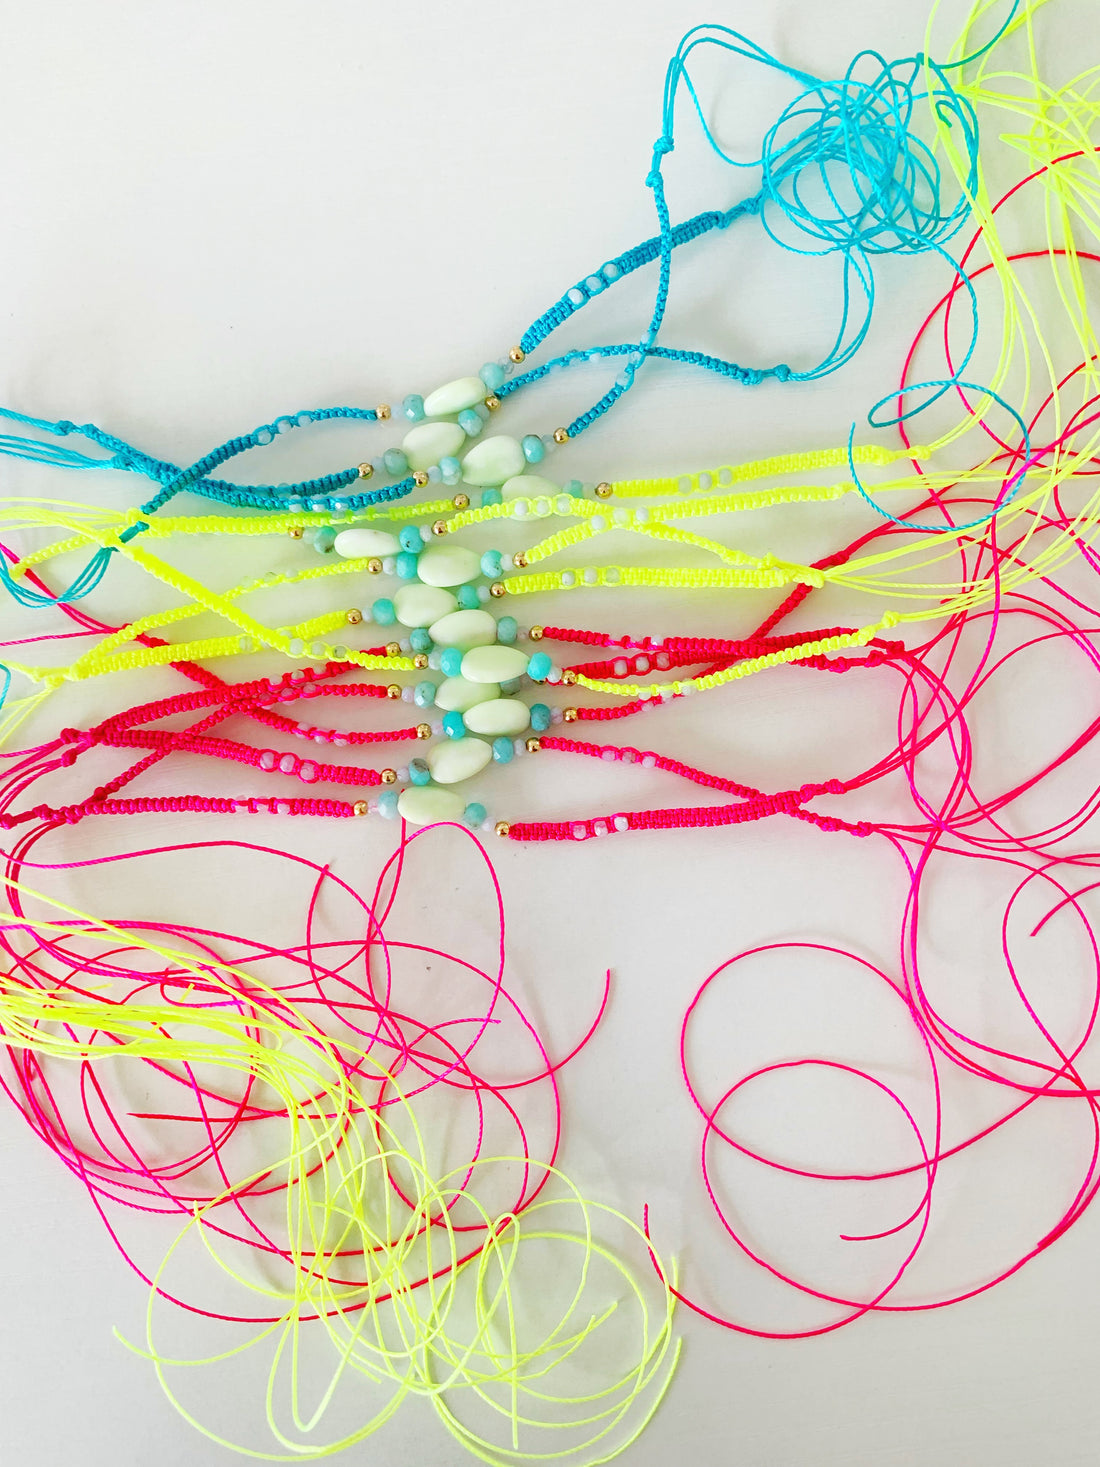 Coastal Bracelets for the Cape Cod Gift Show. Macramé jewelry in neon colors that are beach inspired by mermaids and madeleines